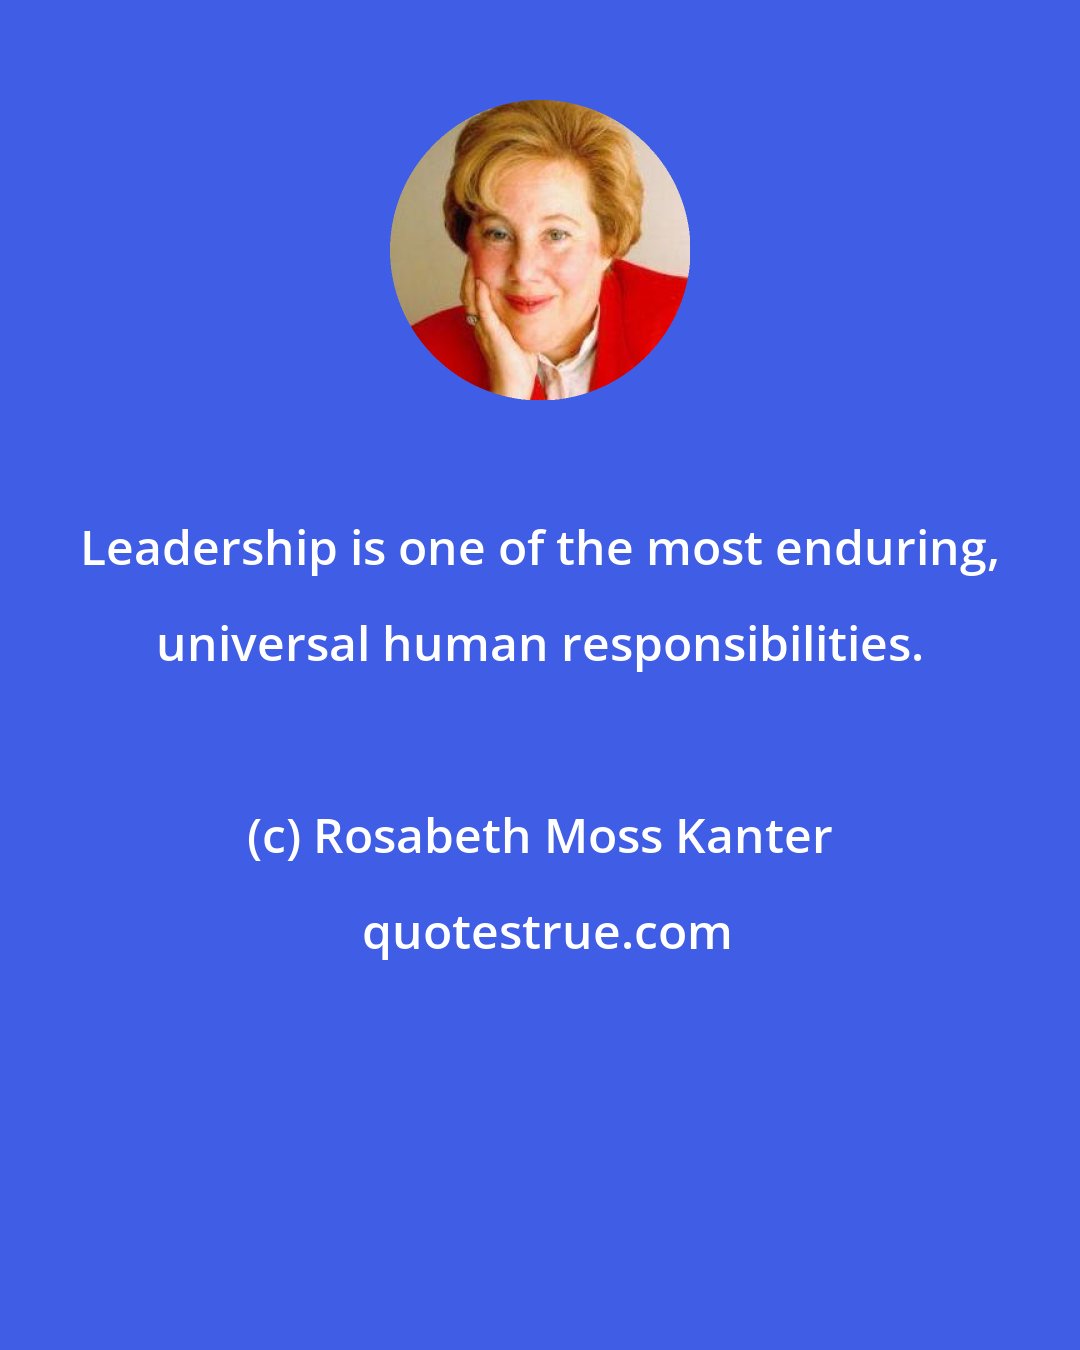 Rosabeth Moss Kanter: Leadership is one of the most enduring, universal human responsibilities.